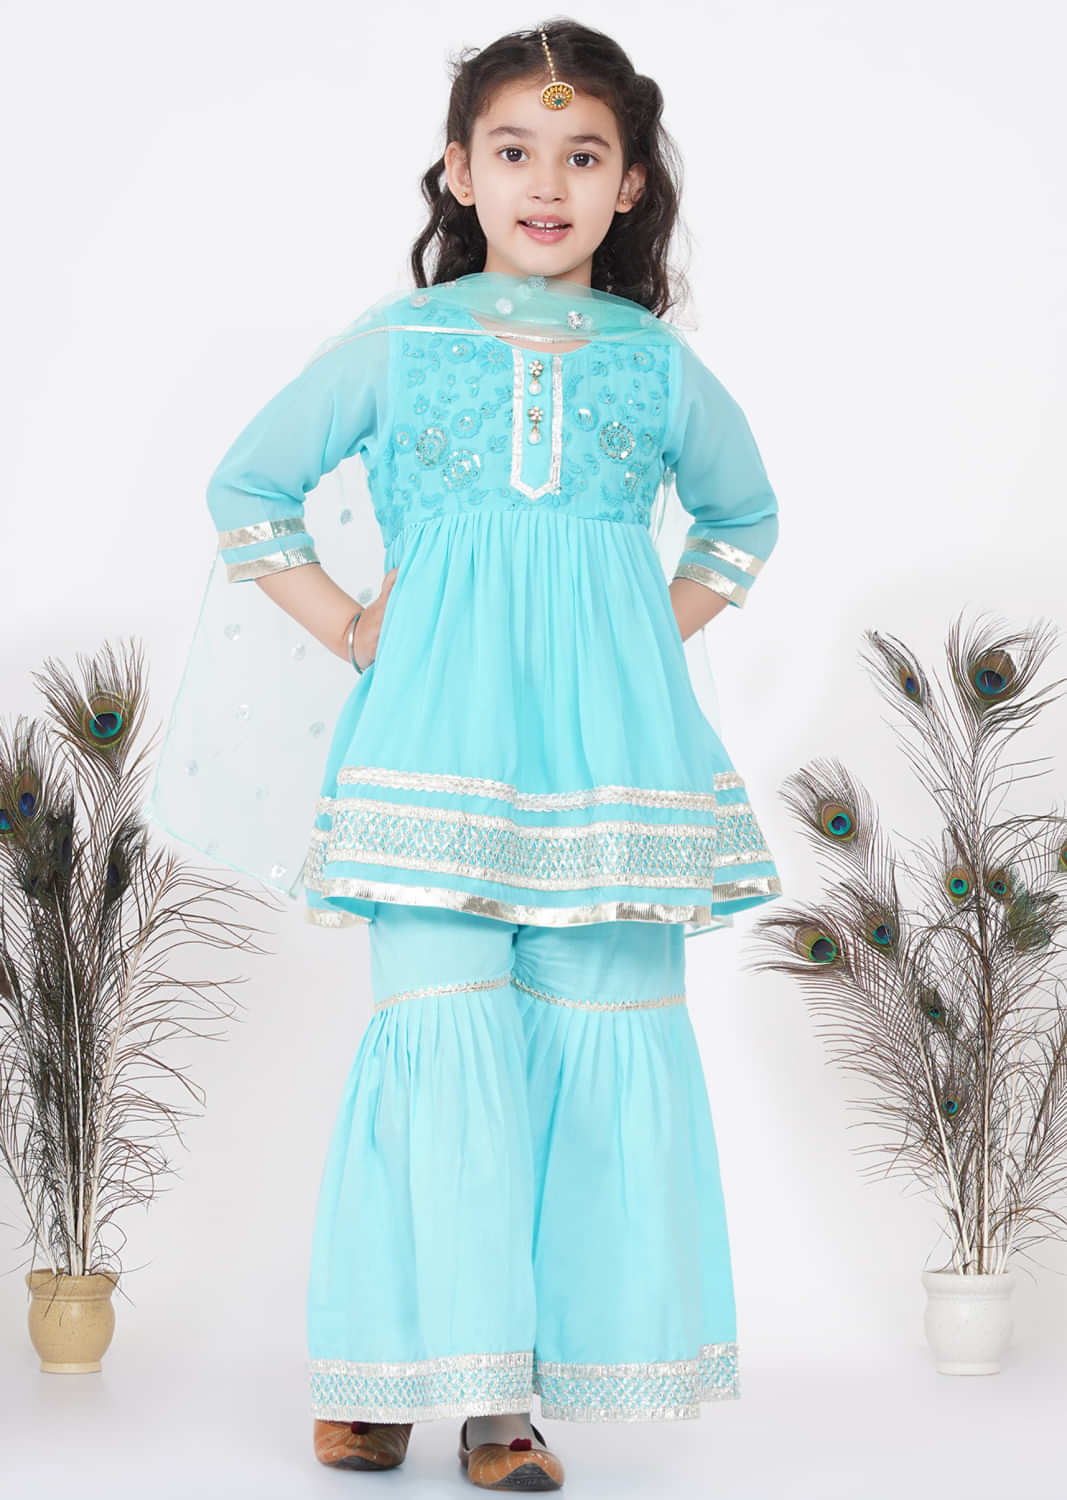 Kalki Aqua Blue Sharara Suit For Girls In Cotton With Embroidery In Gotta Patti And Jaipuri Lacework